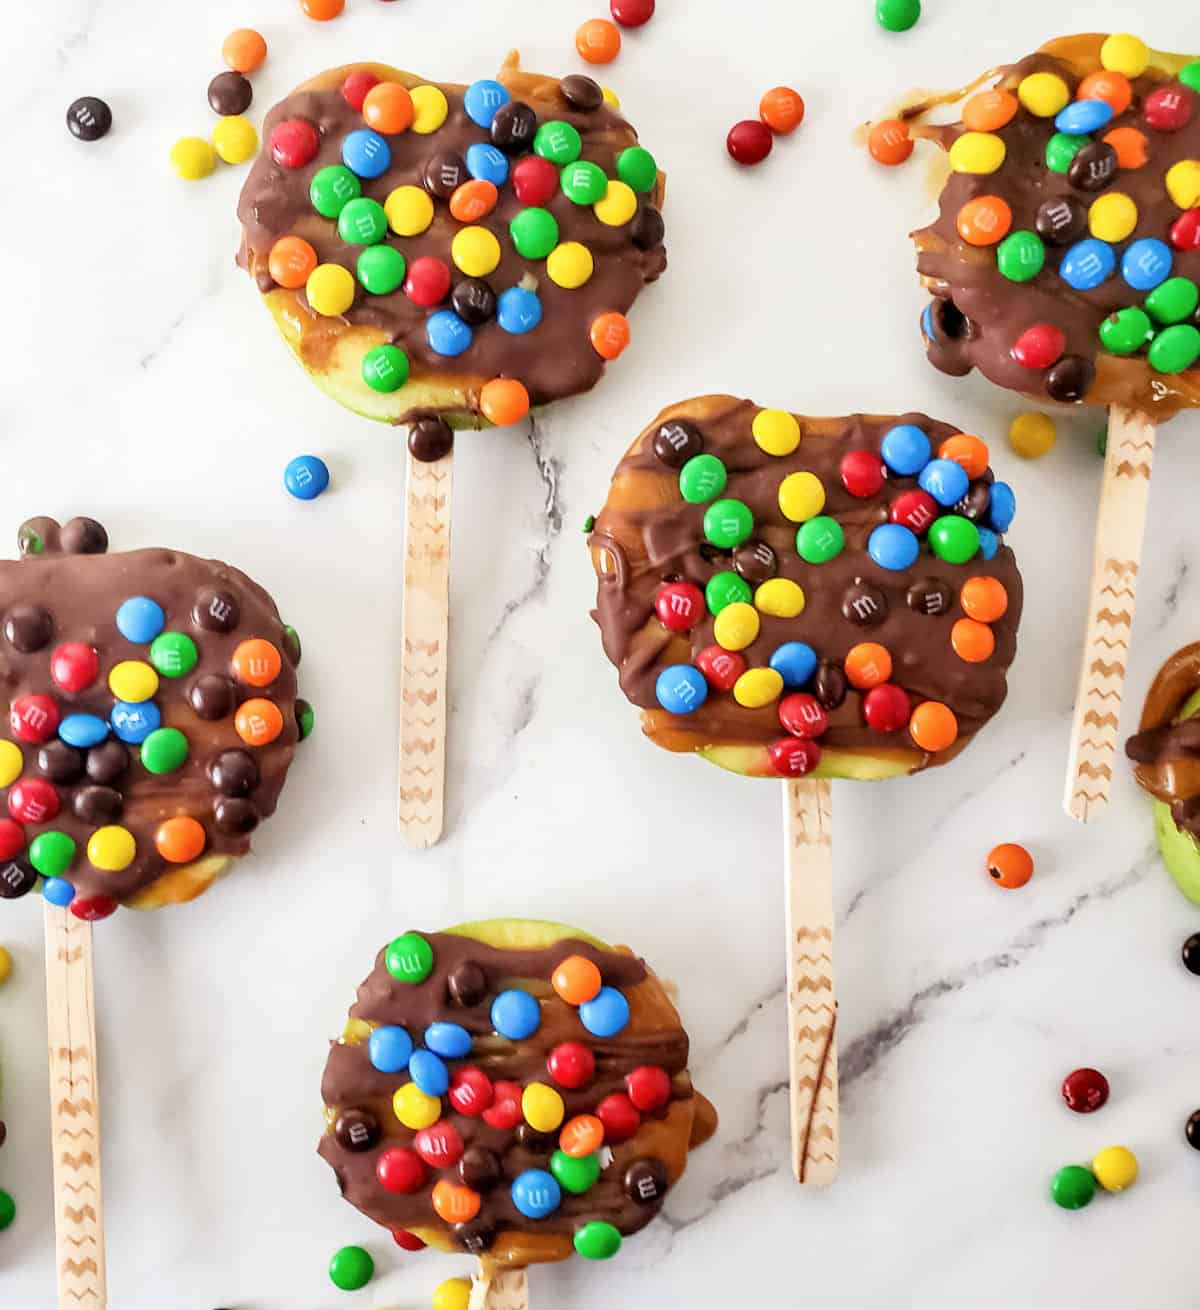 White marble surface with several candy and chocolate covered apple slices on a stick. 